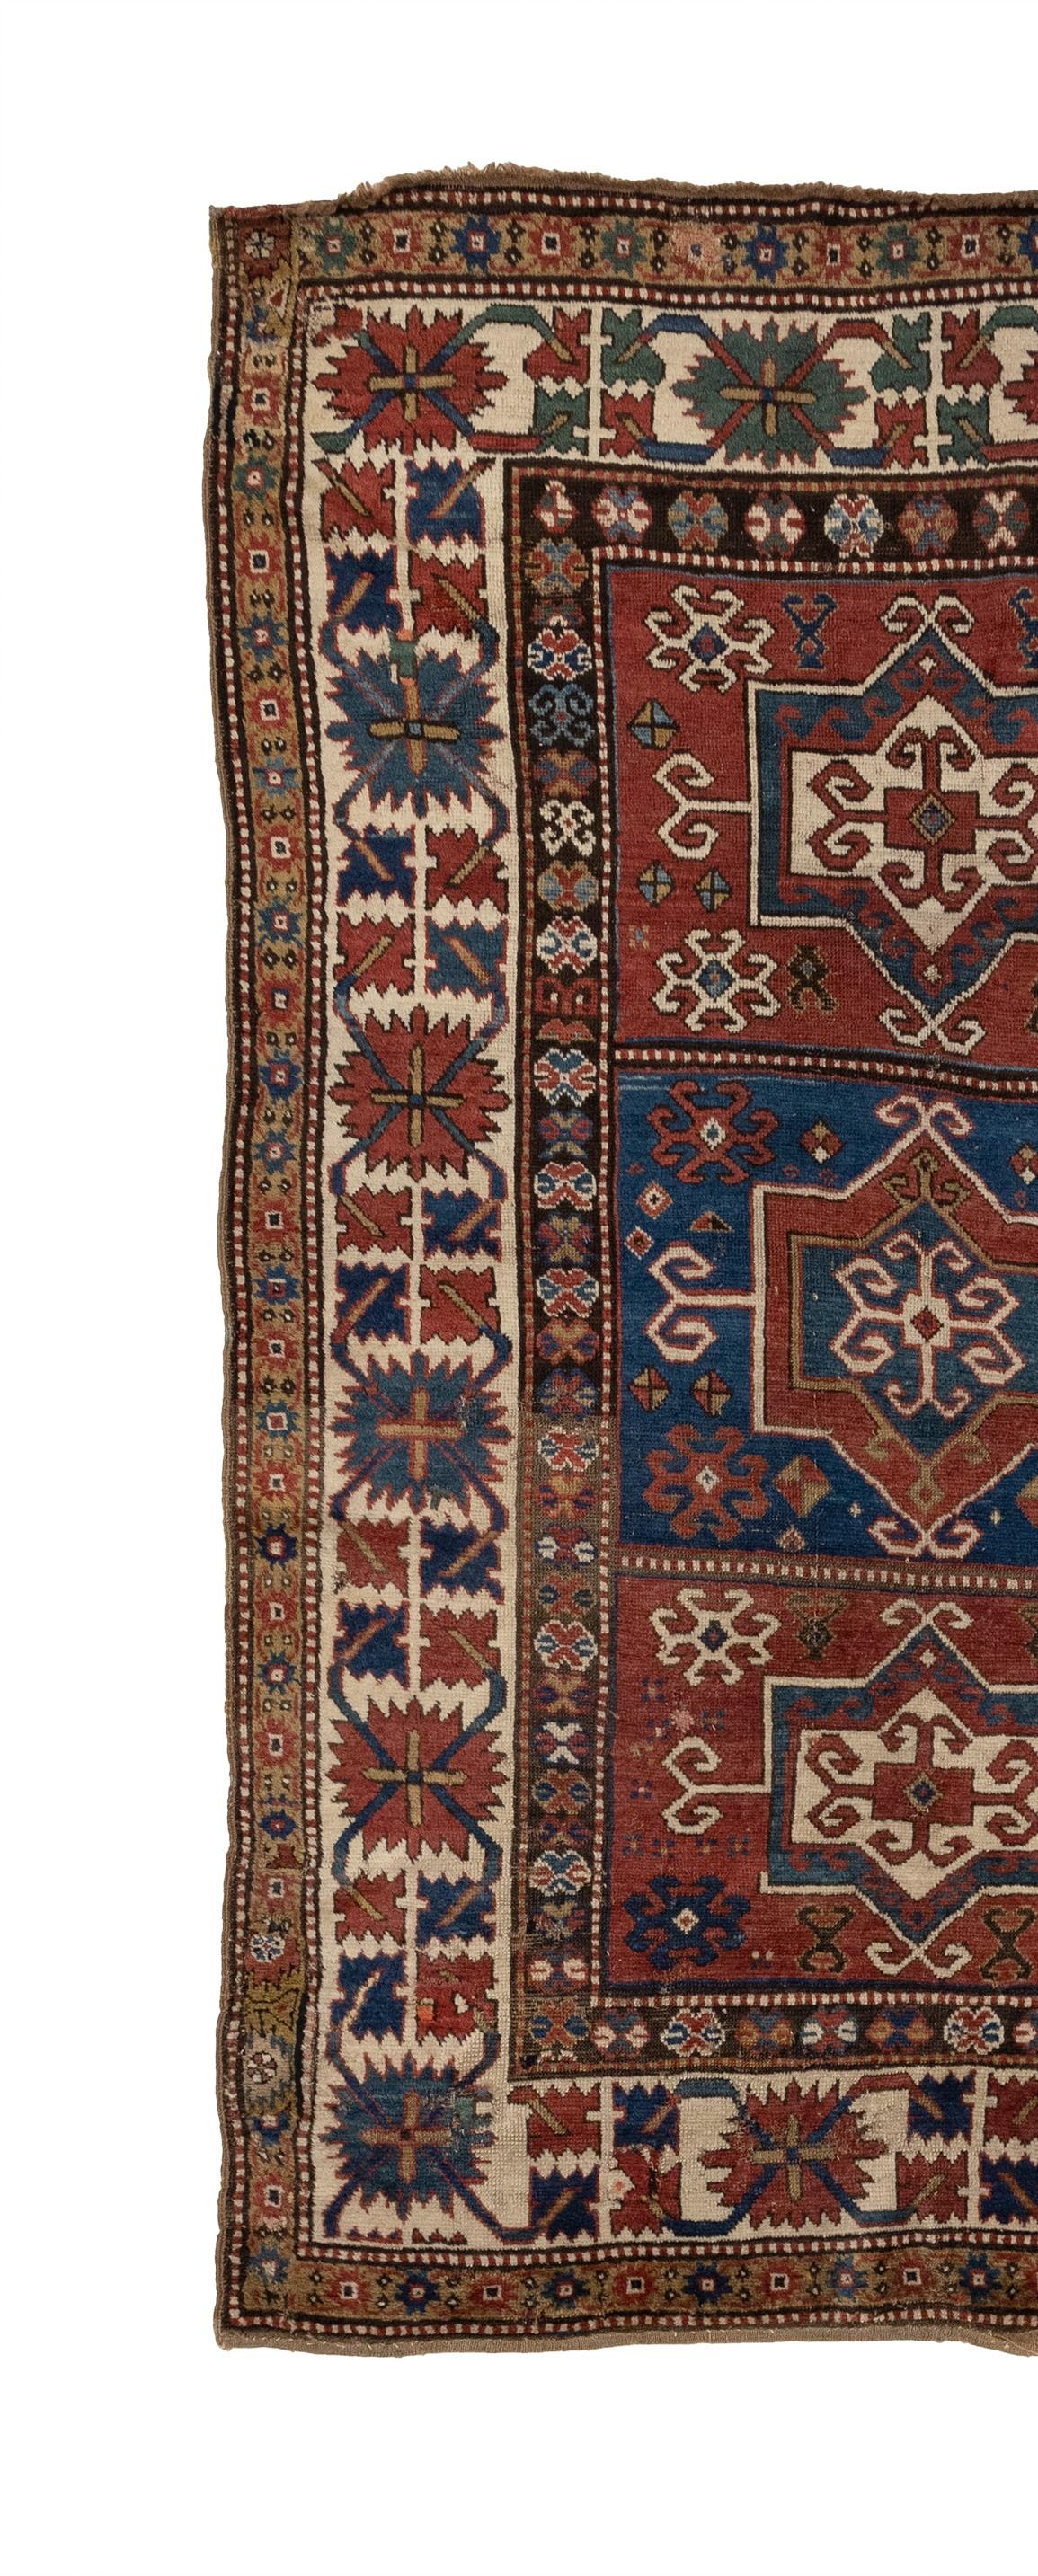 This is an Antique Caucasian Kazak from the 1880s featuring three medallions. Its intricate details are stunning, and it boasts a variety of geometric patterns in color schemes that range from earthy to vibrant. The Tribal Collection is perfect for